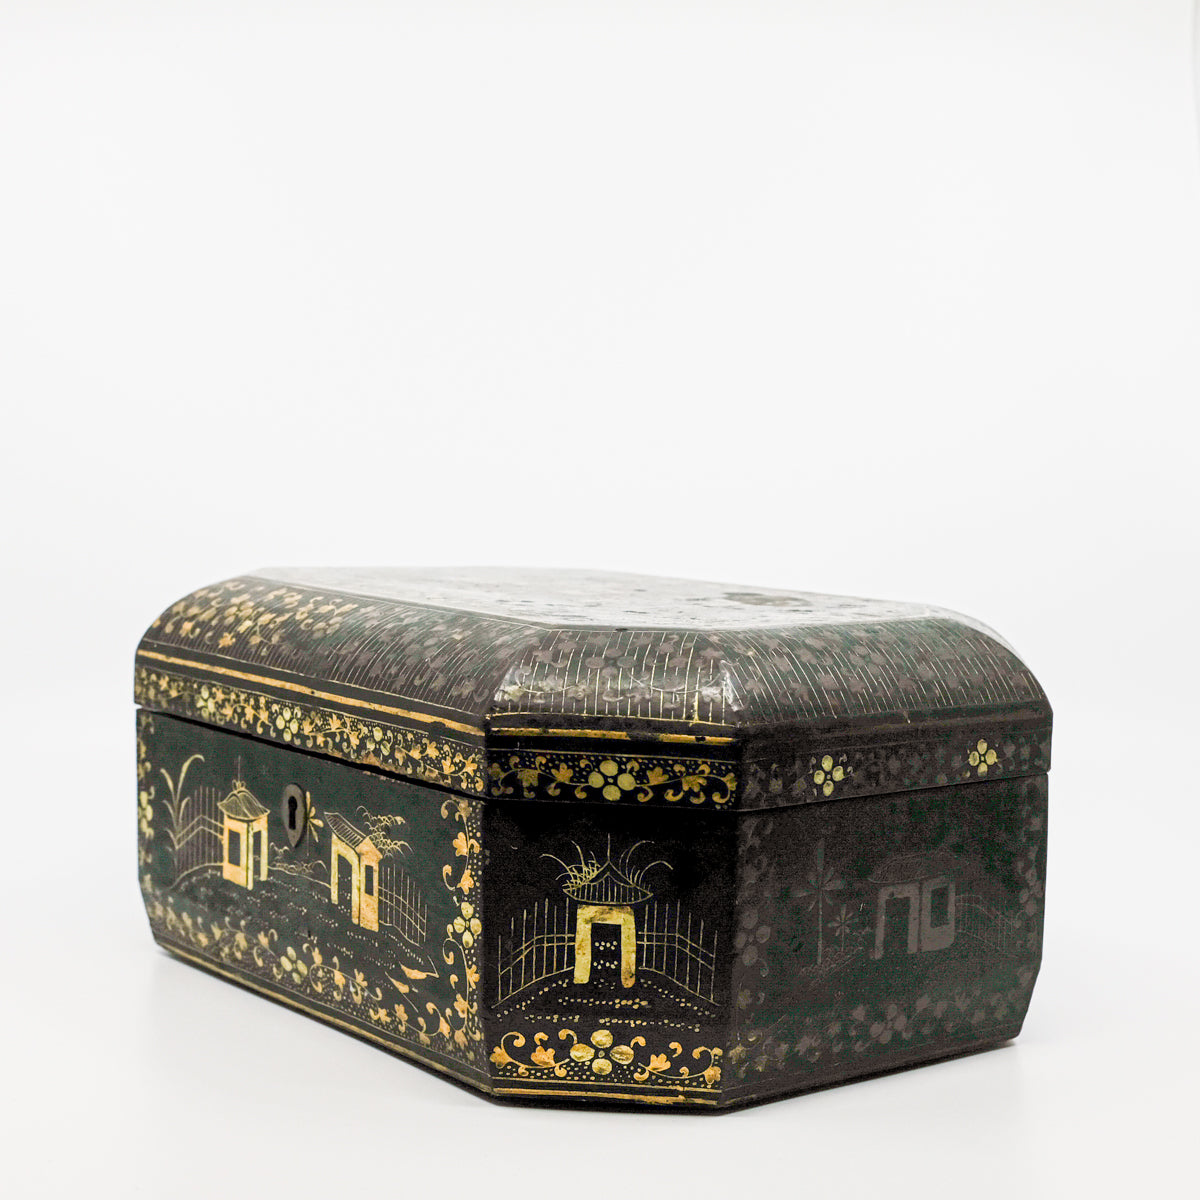 corner view of black and gold paper marche lidded box